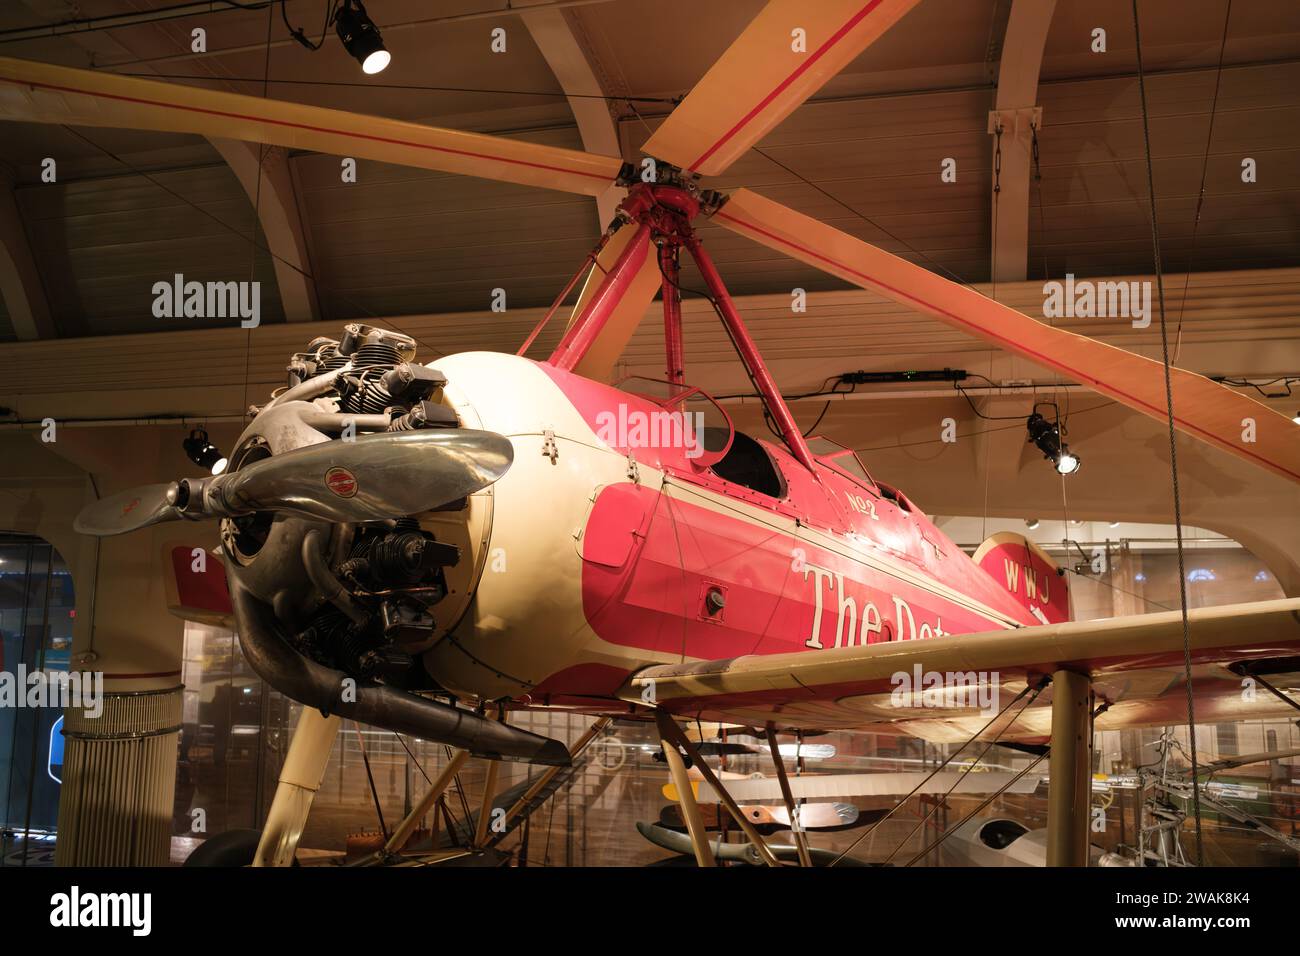 1931 Pitcairn PCA-2 autogiro in mostra presso l'Henry Ford Museum of American Innovation, Dearborn Michigan USA Foto Stock